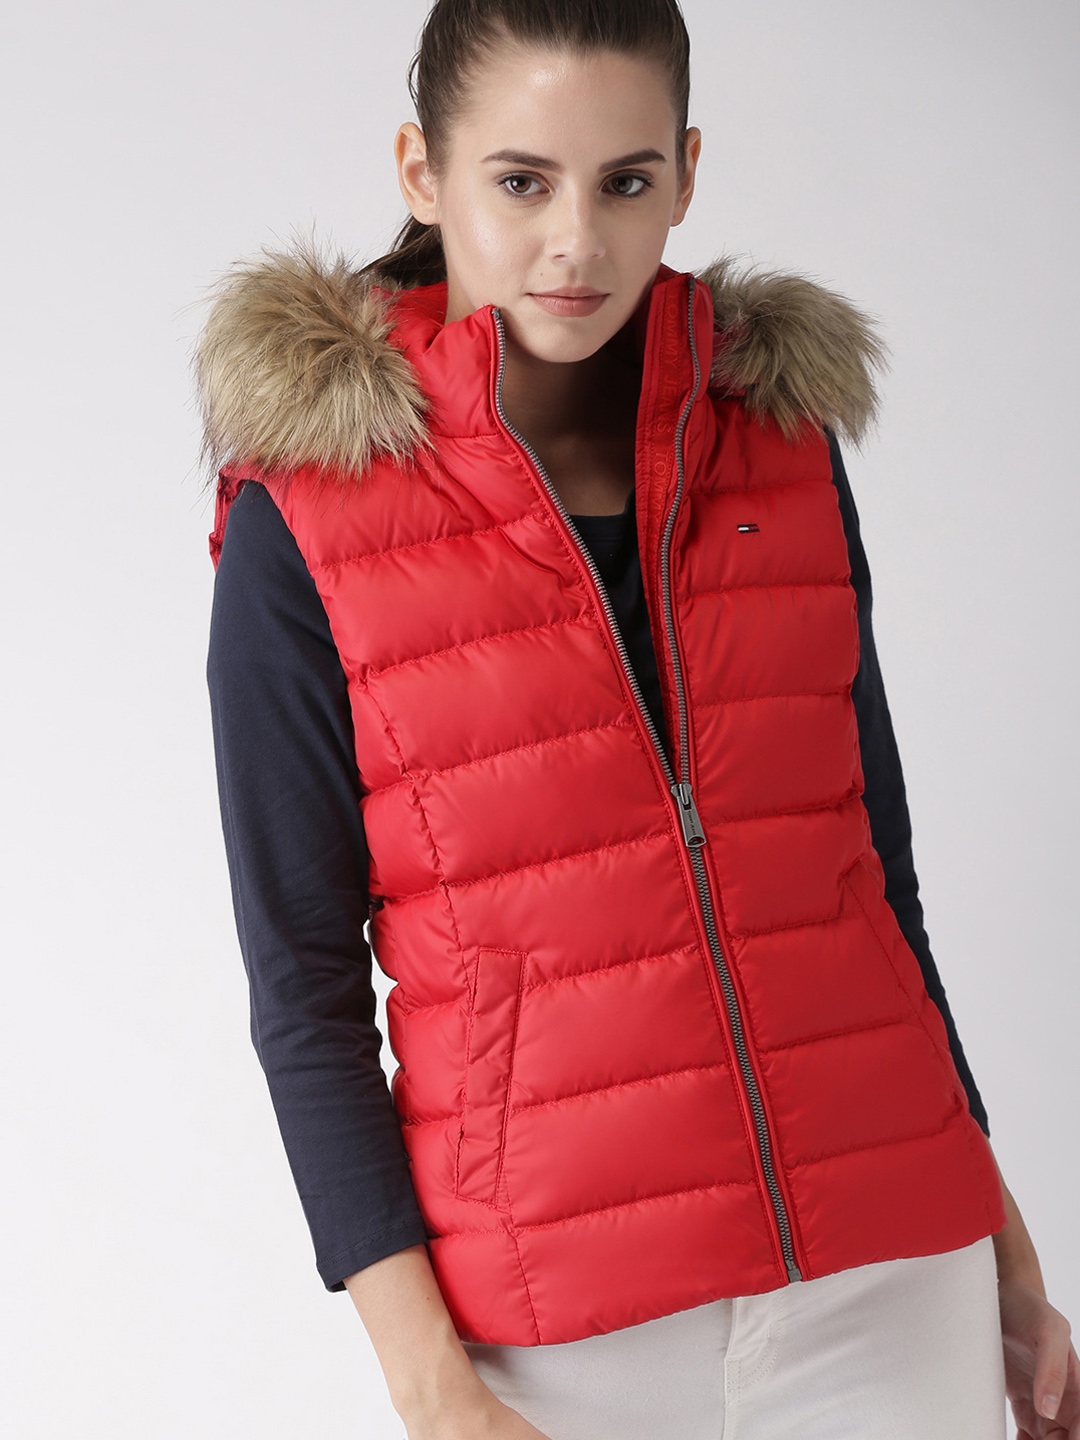 tommy hilfiger puffer jacket red